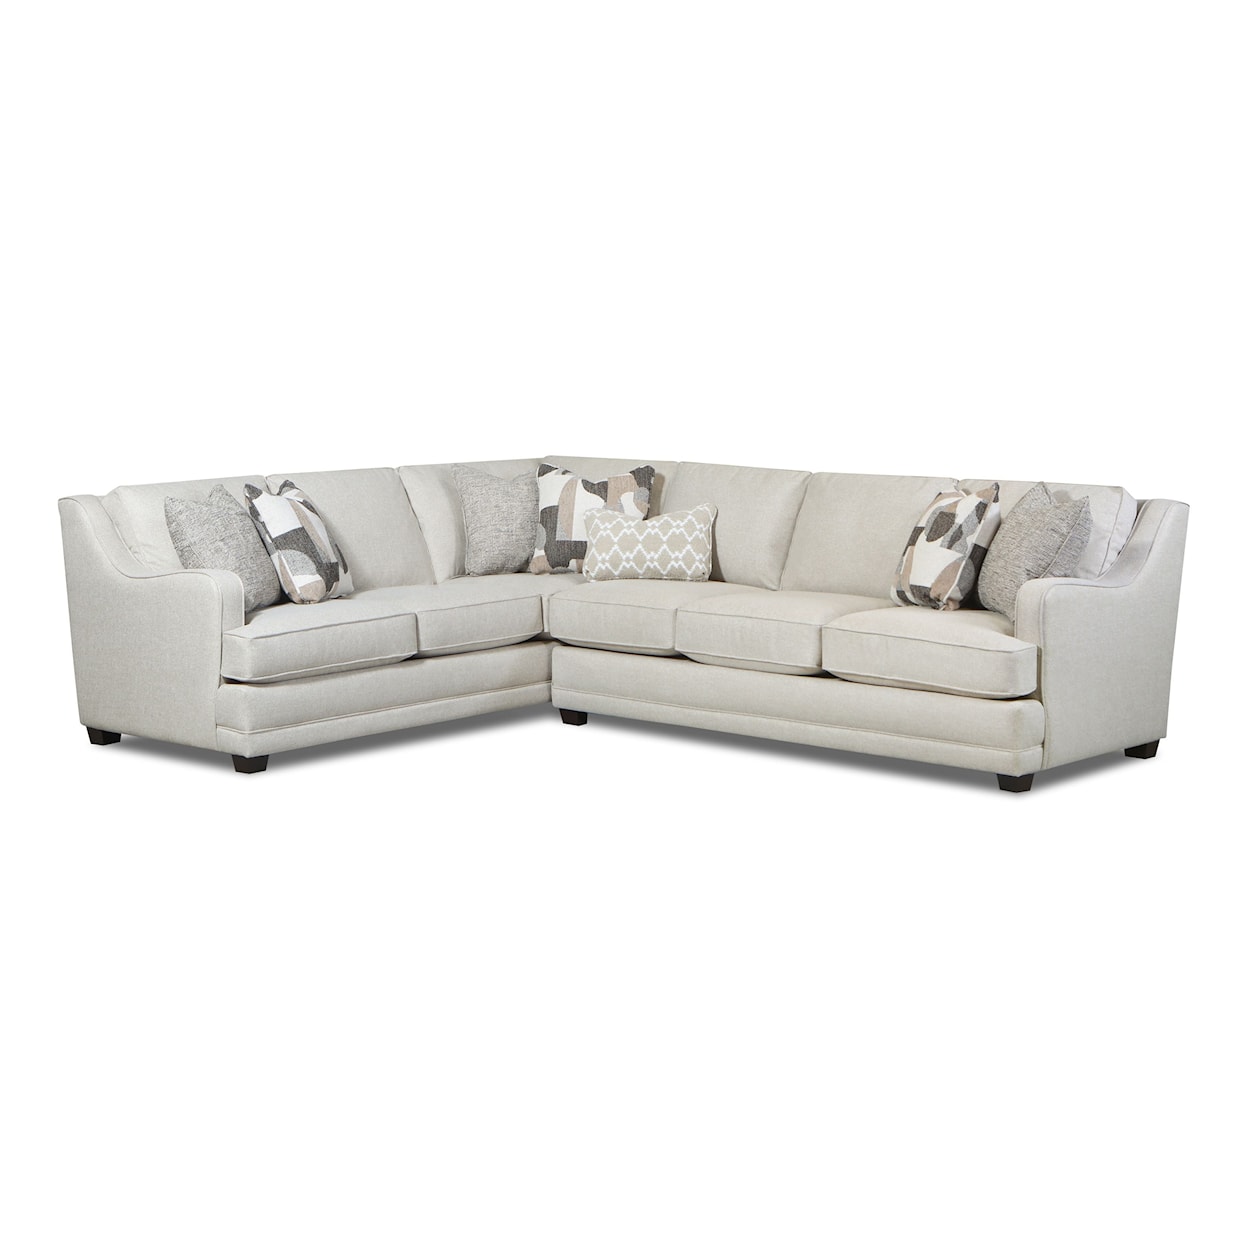 Fusion Furniture 7000 GOLD RUSH ANTIQUE Sectional Sofa